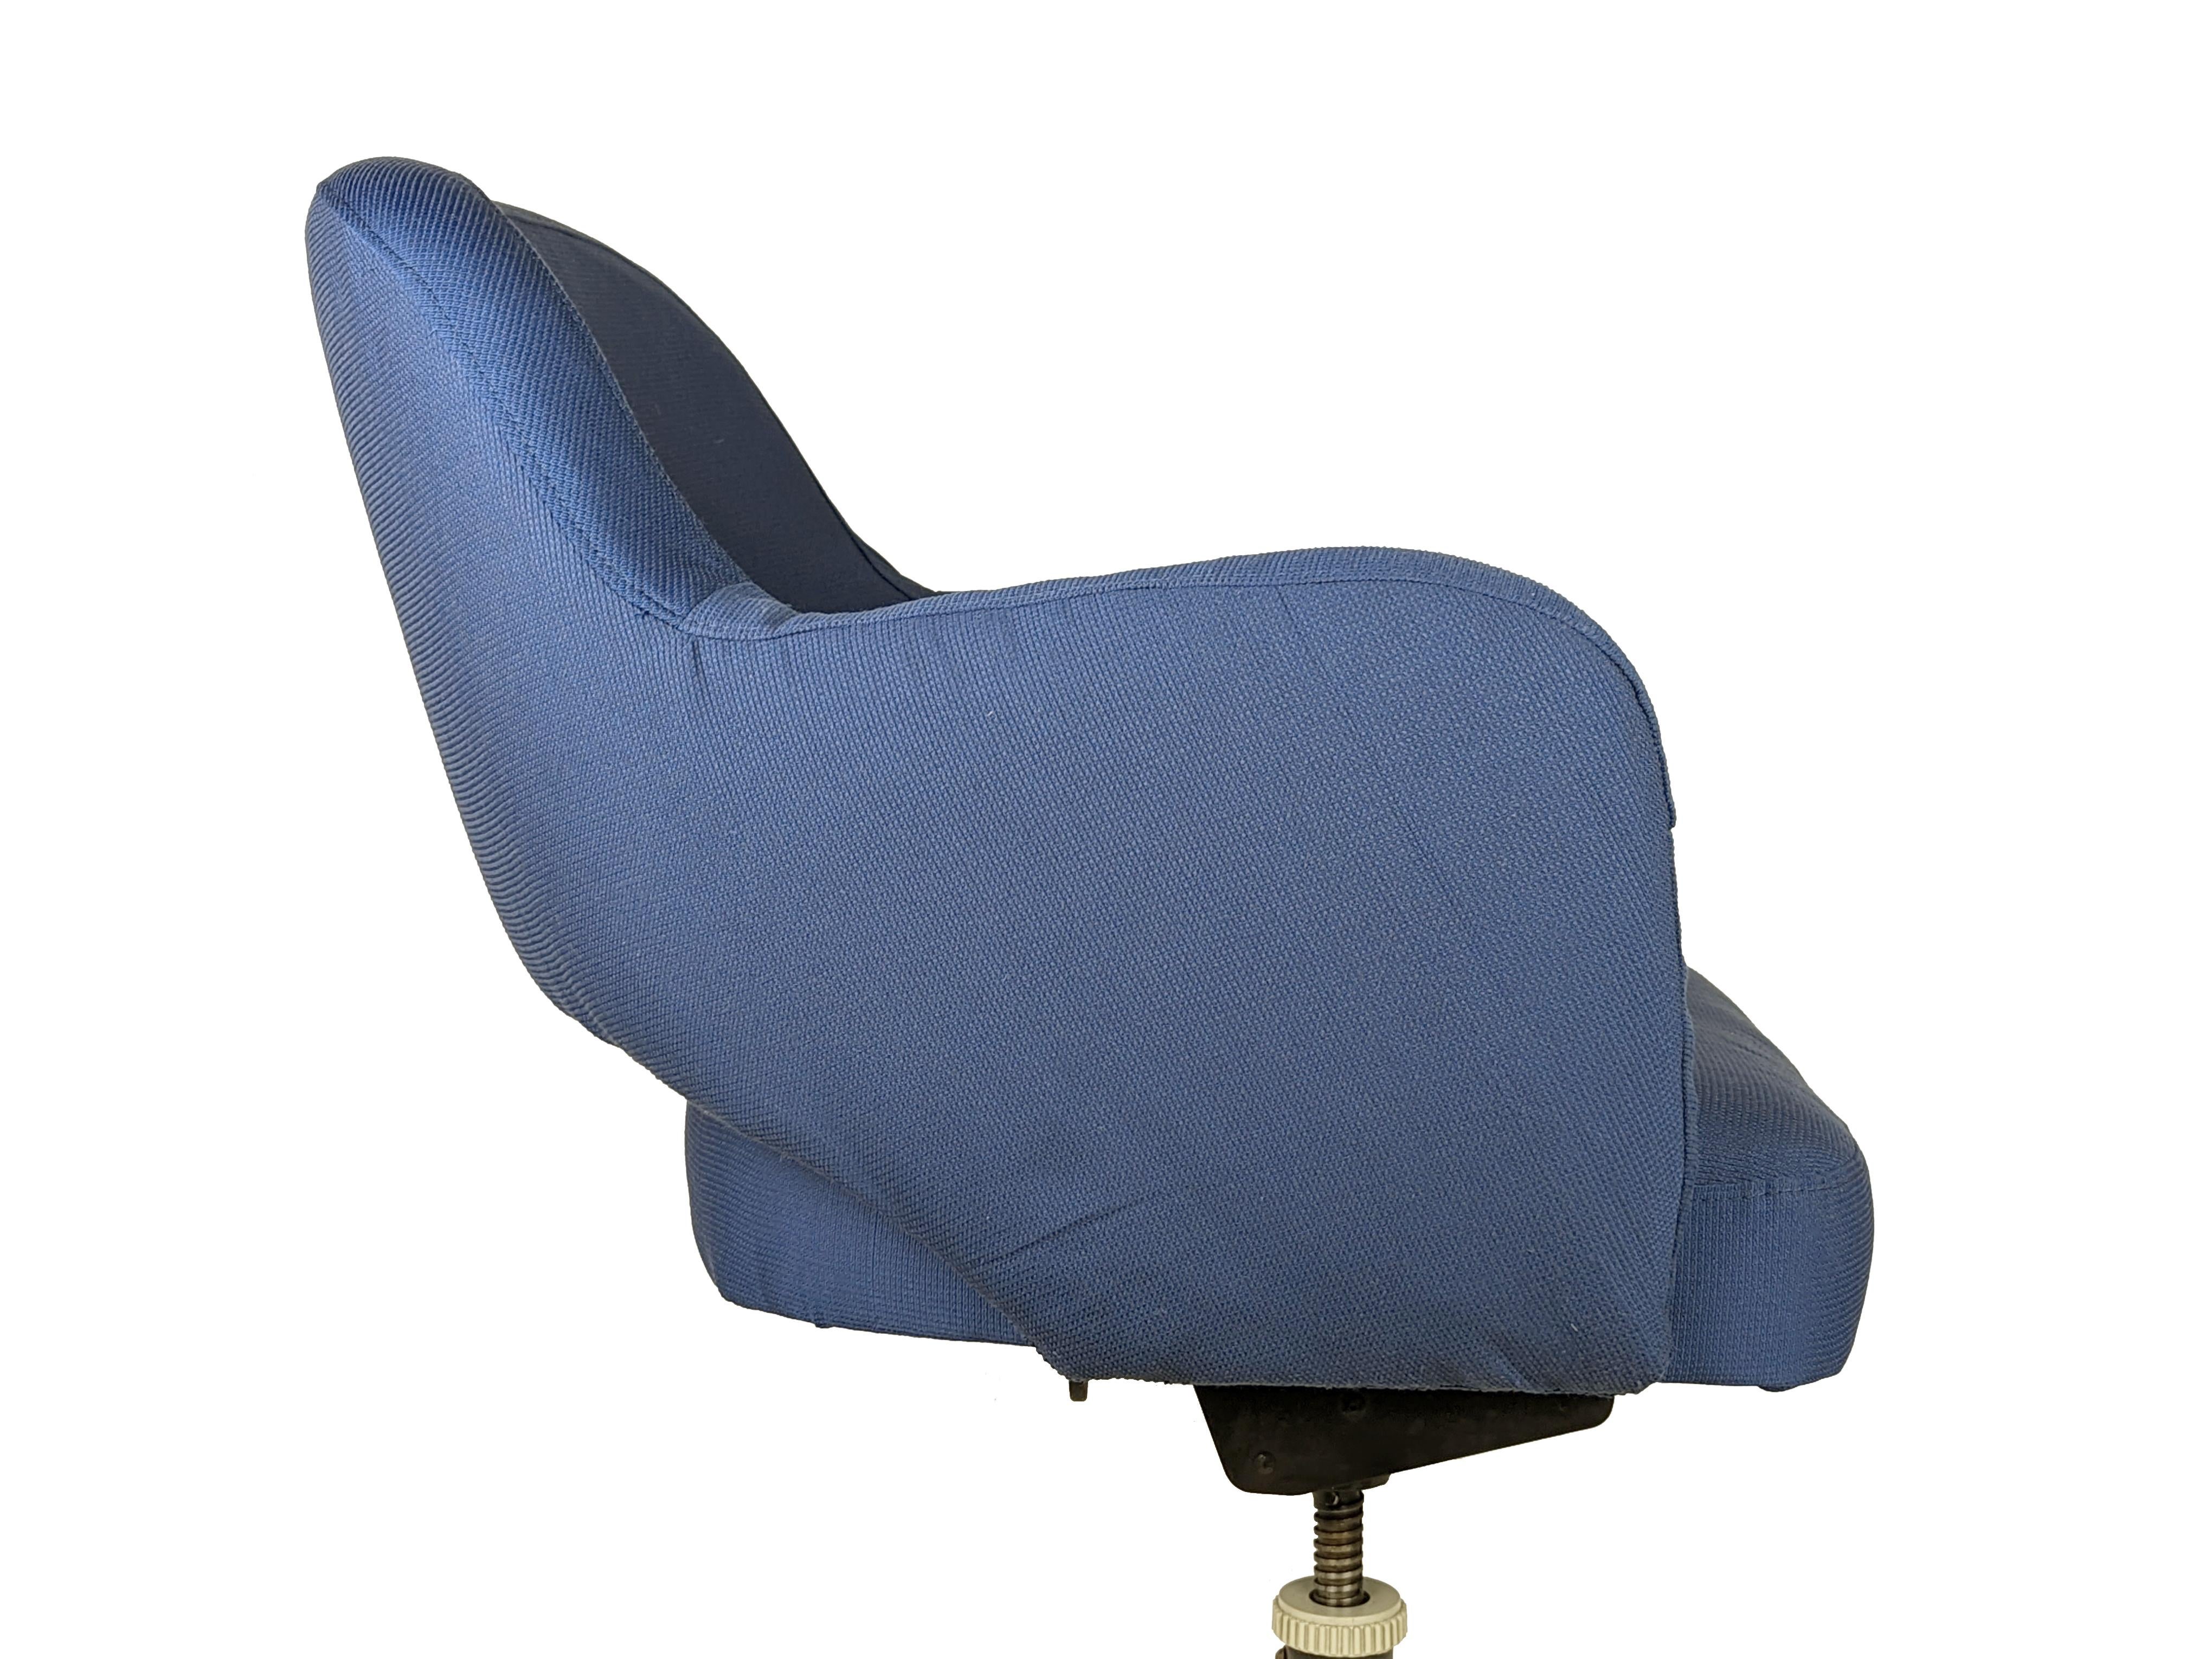 Space Age Italian blue fabric and Metal Wheeled Office Chair, 1960-70s For Sale